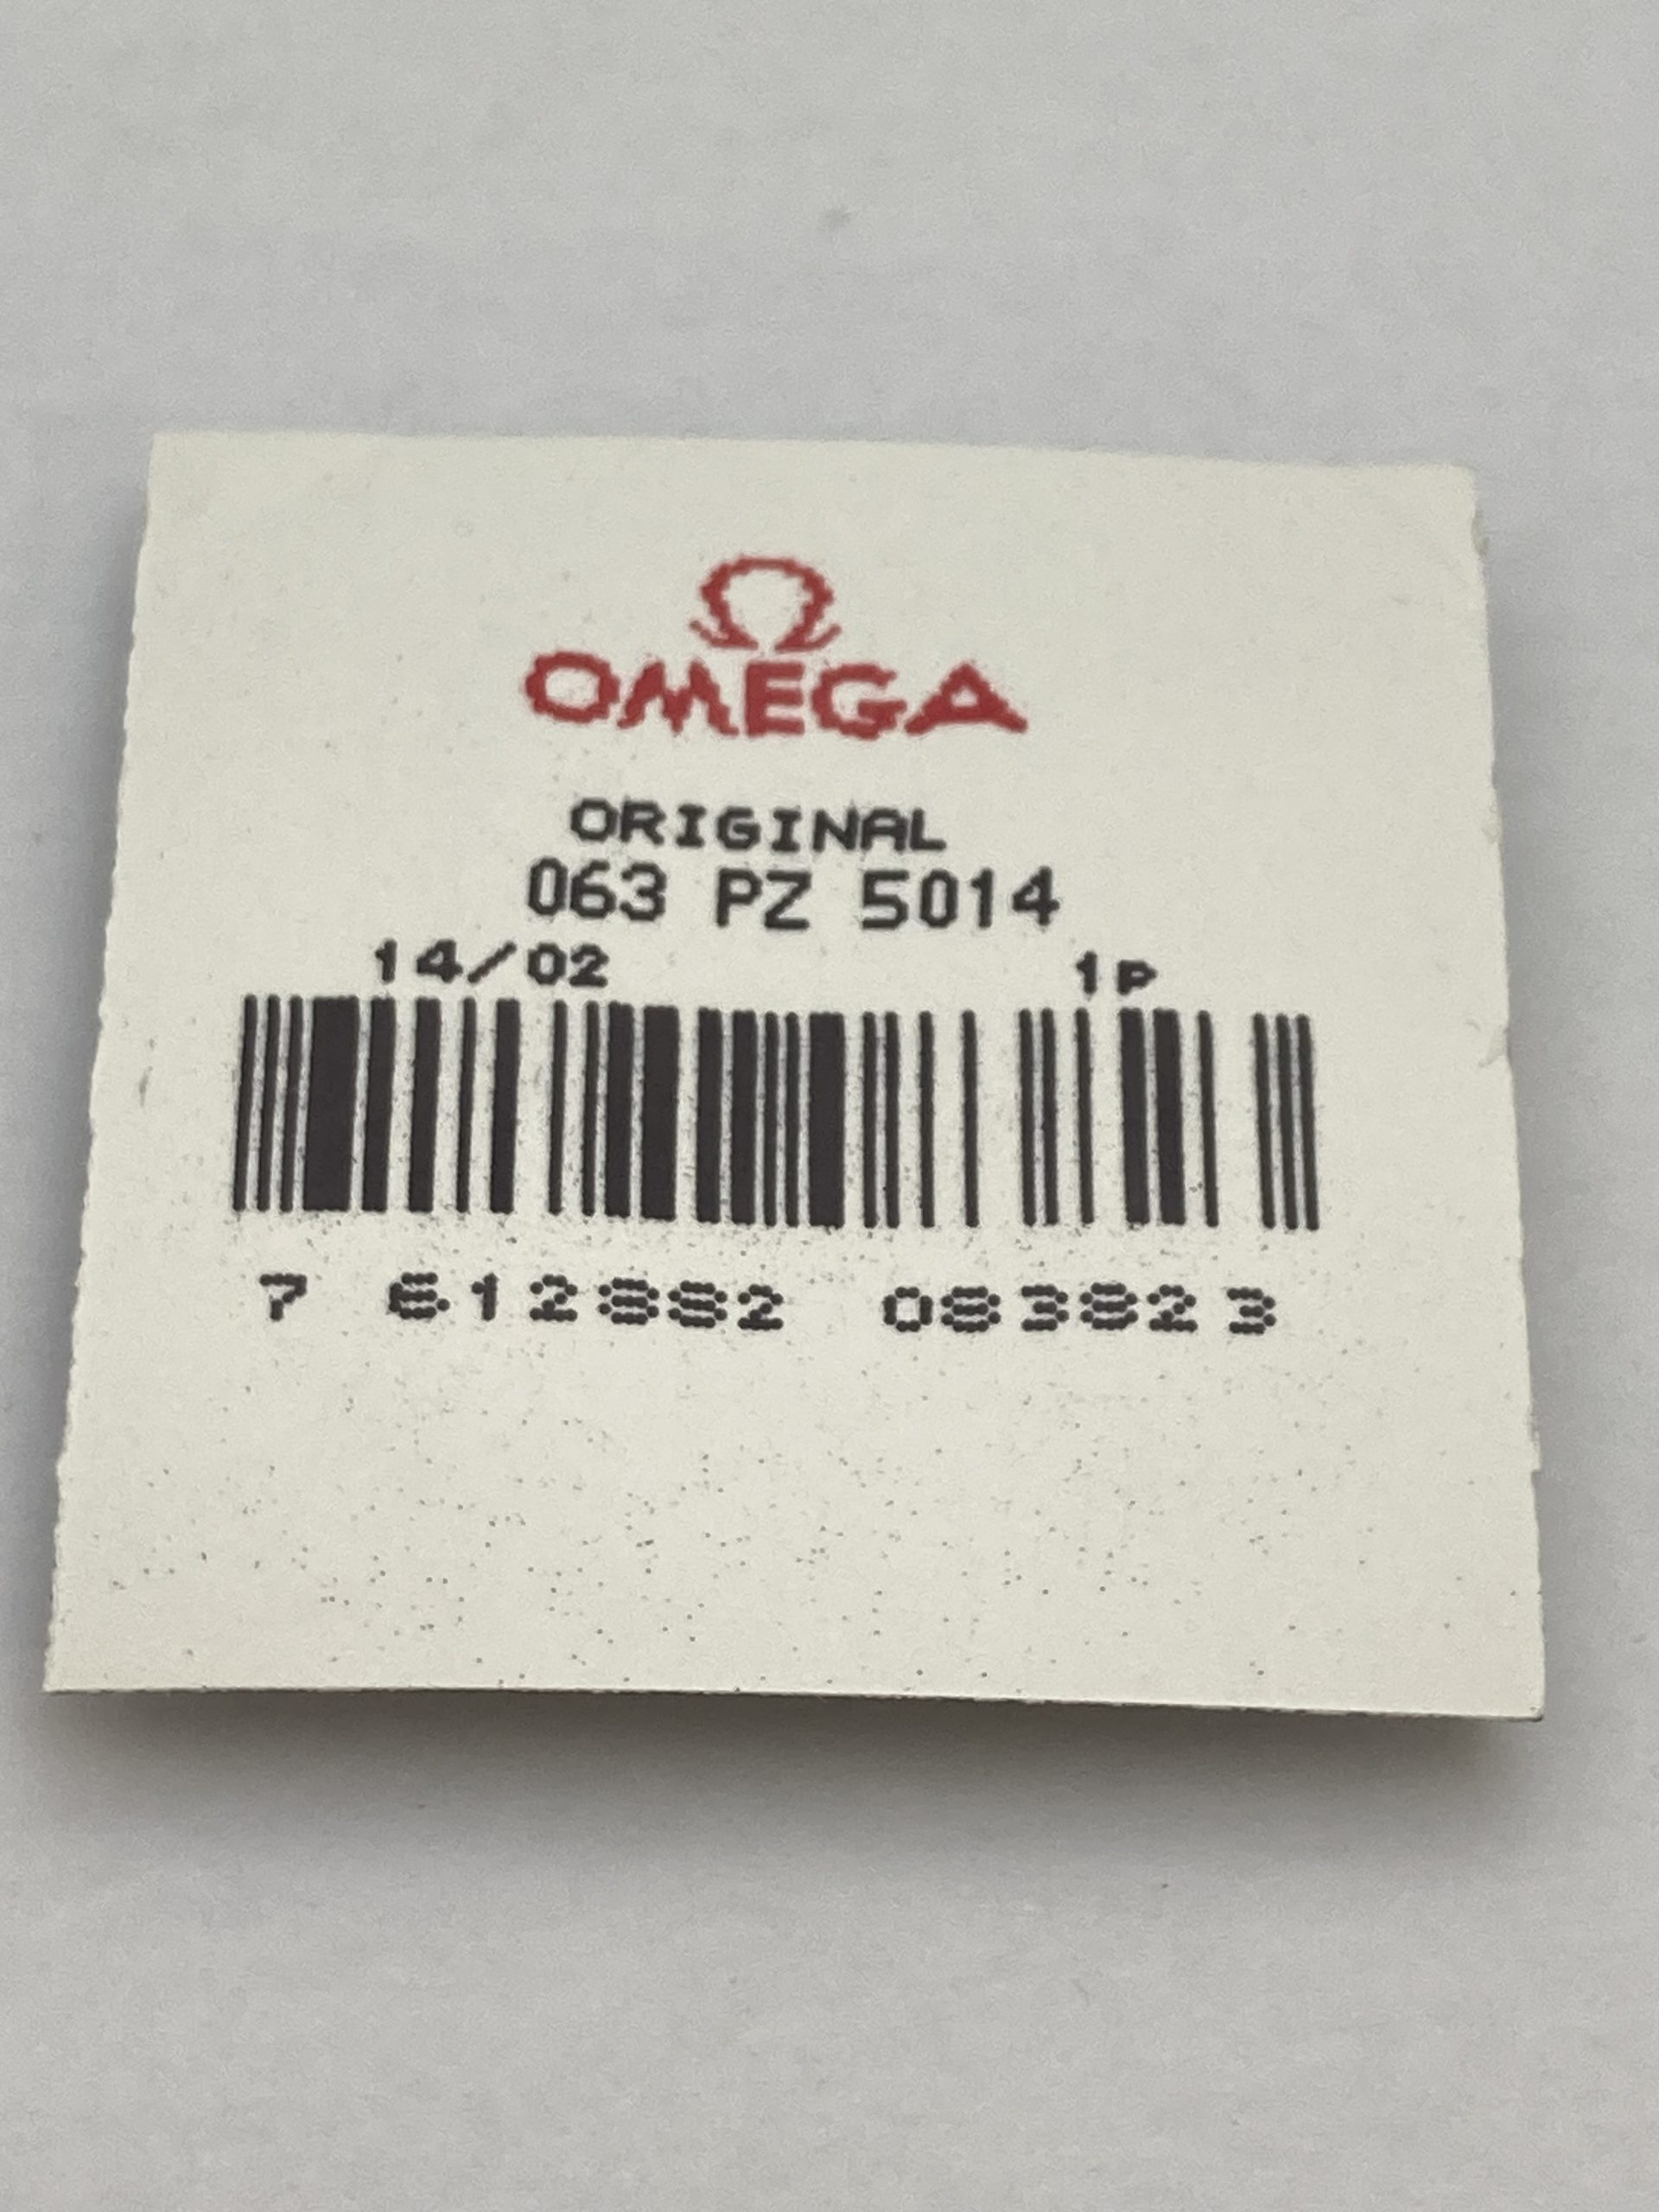 Genuine Omega Watch Crystal 063PZ5014 Product Thumbail (View full Size)